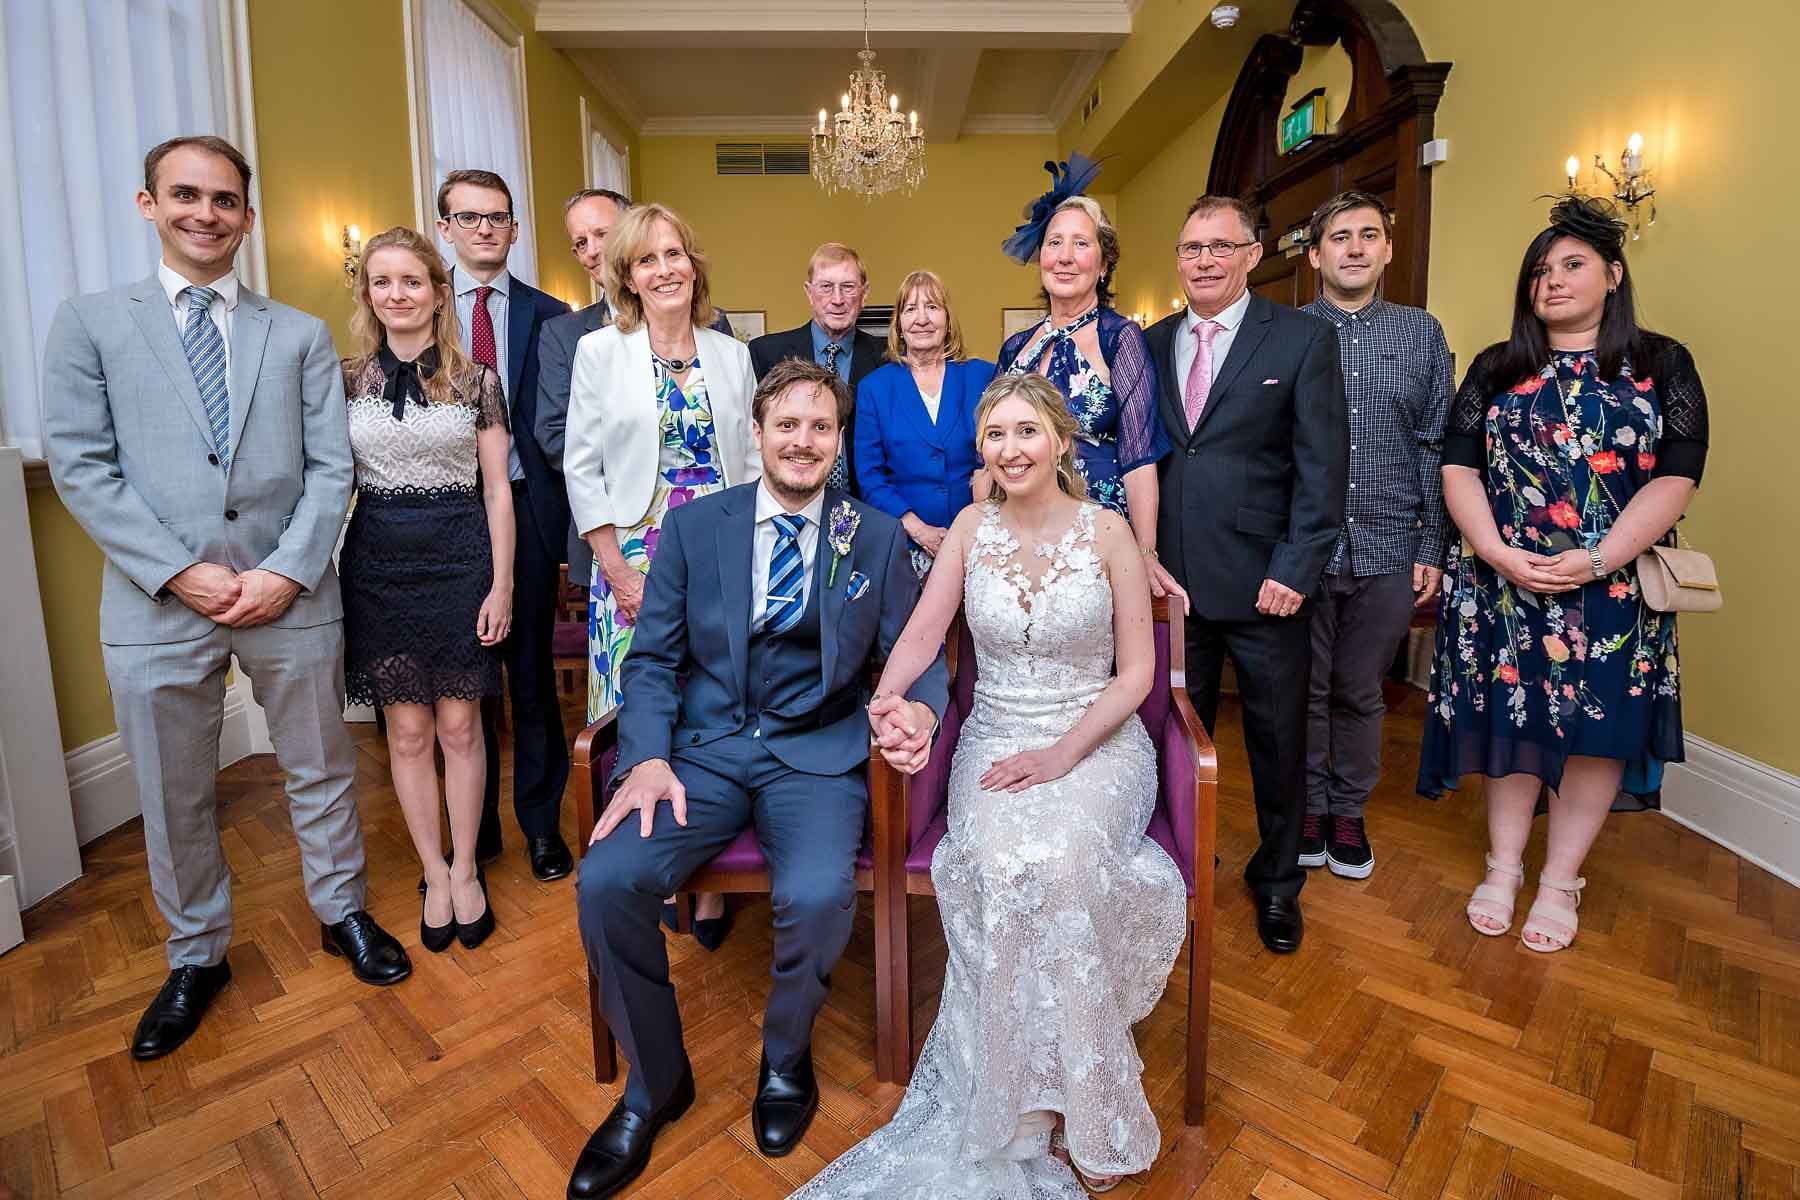 The seated bride and groom hold hands with entire wedding party standing behind them in the Brydon Room in Chelsea